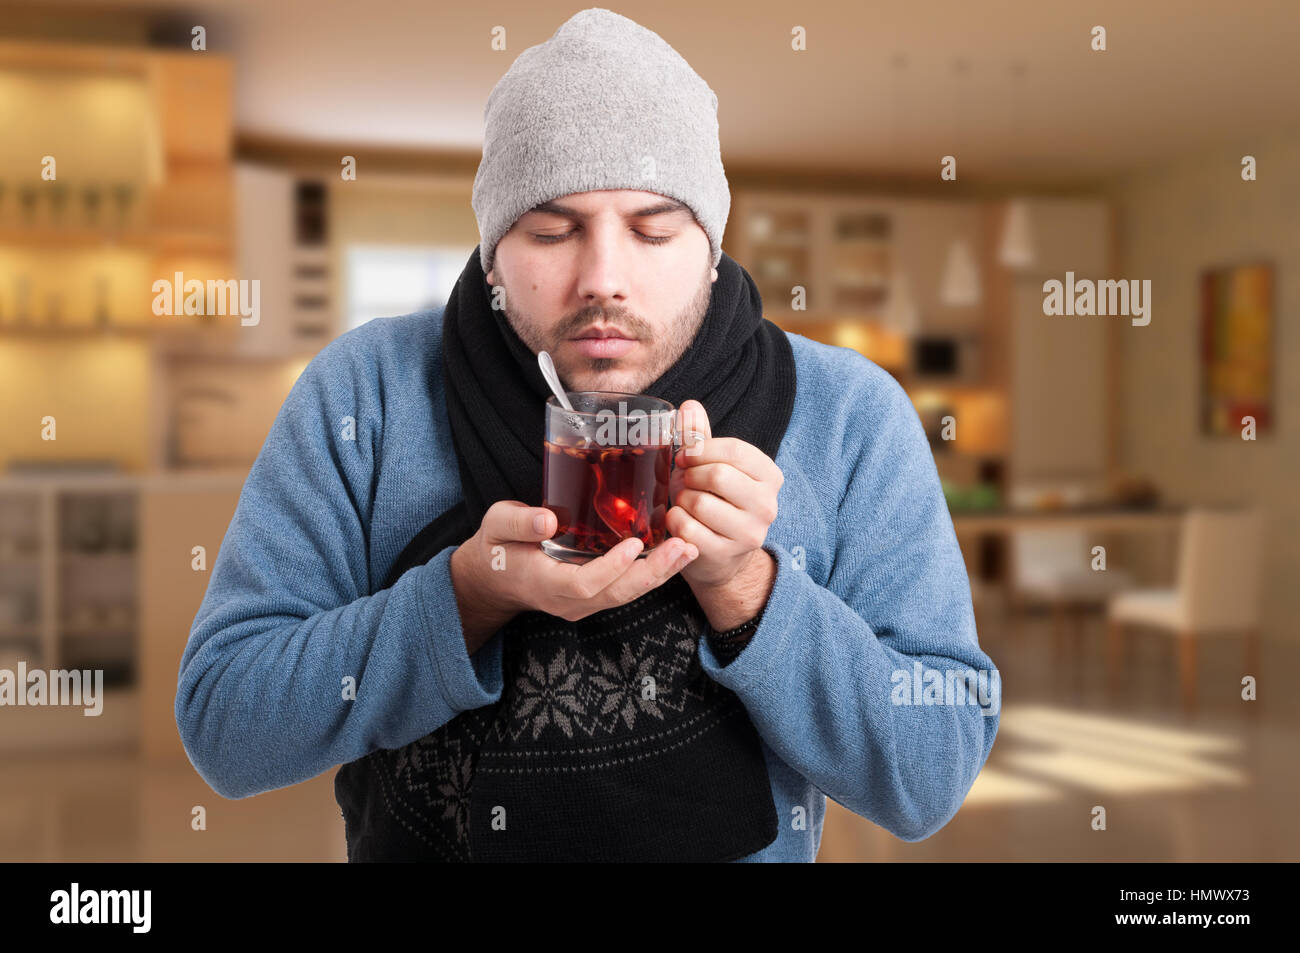 Sick man with flu holding and enjoying a warm cup of tea at his home Stock Photo